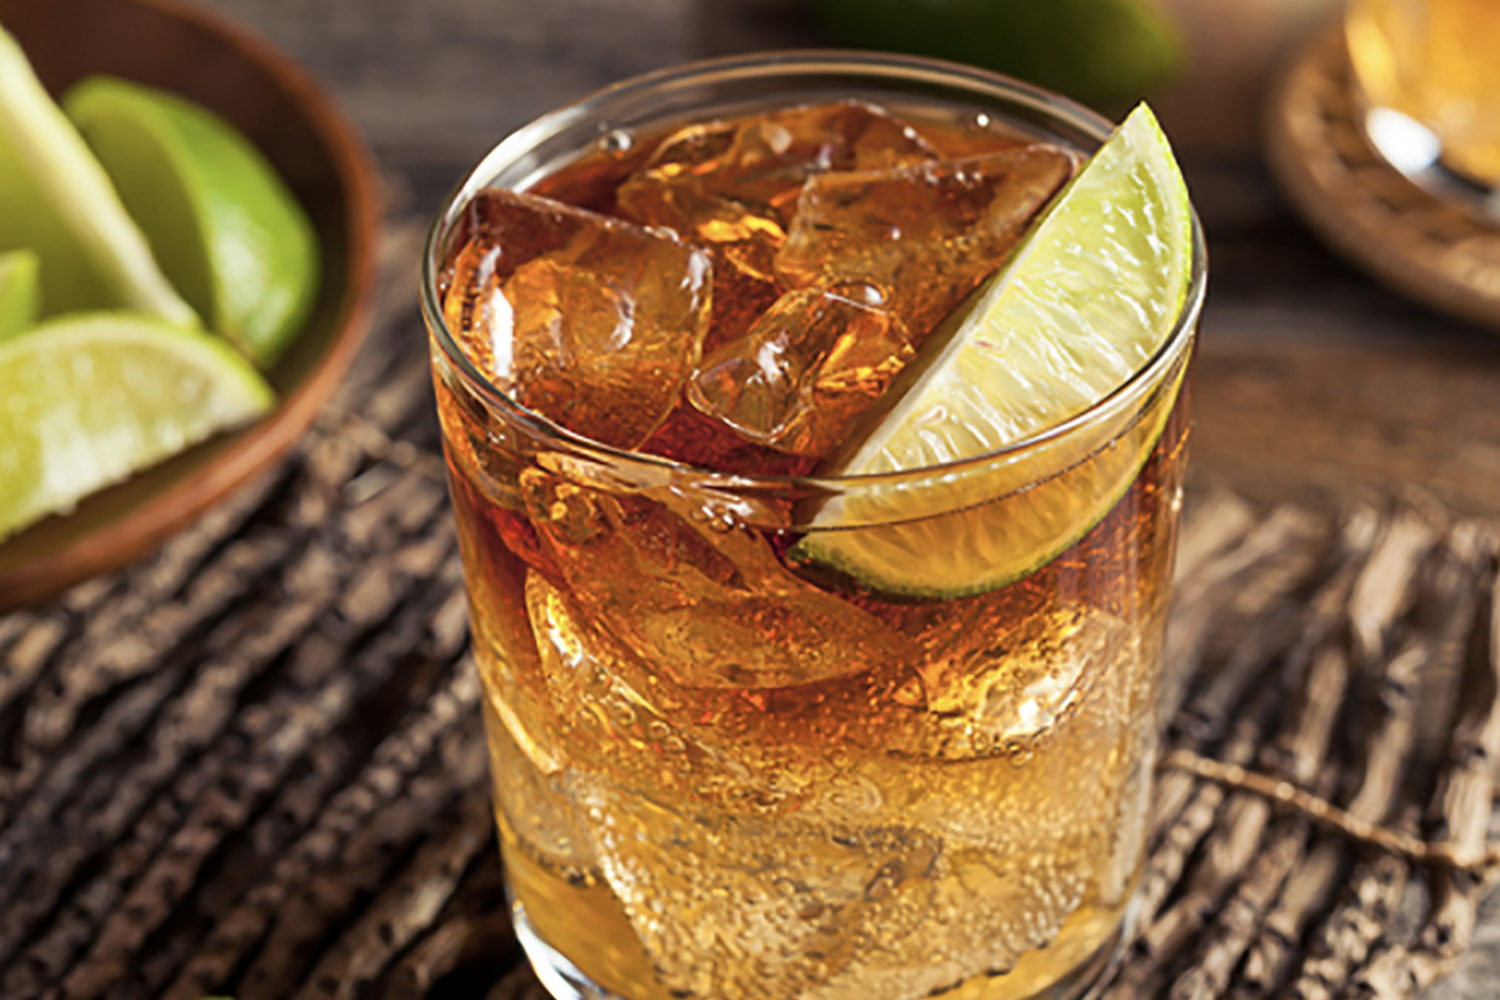 Refresh your Licensing portfolio with on-trend beverage photography